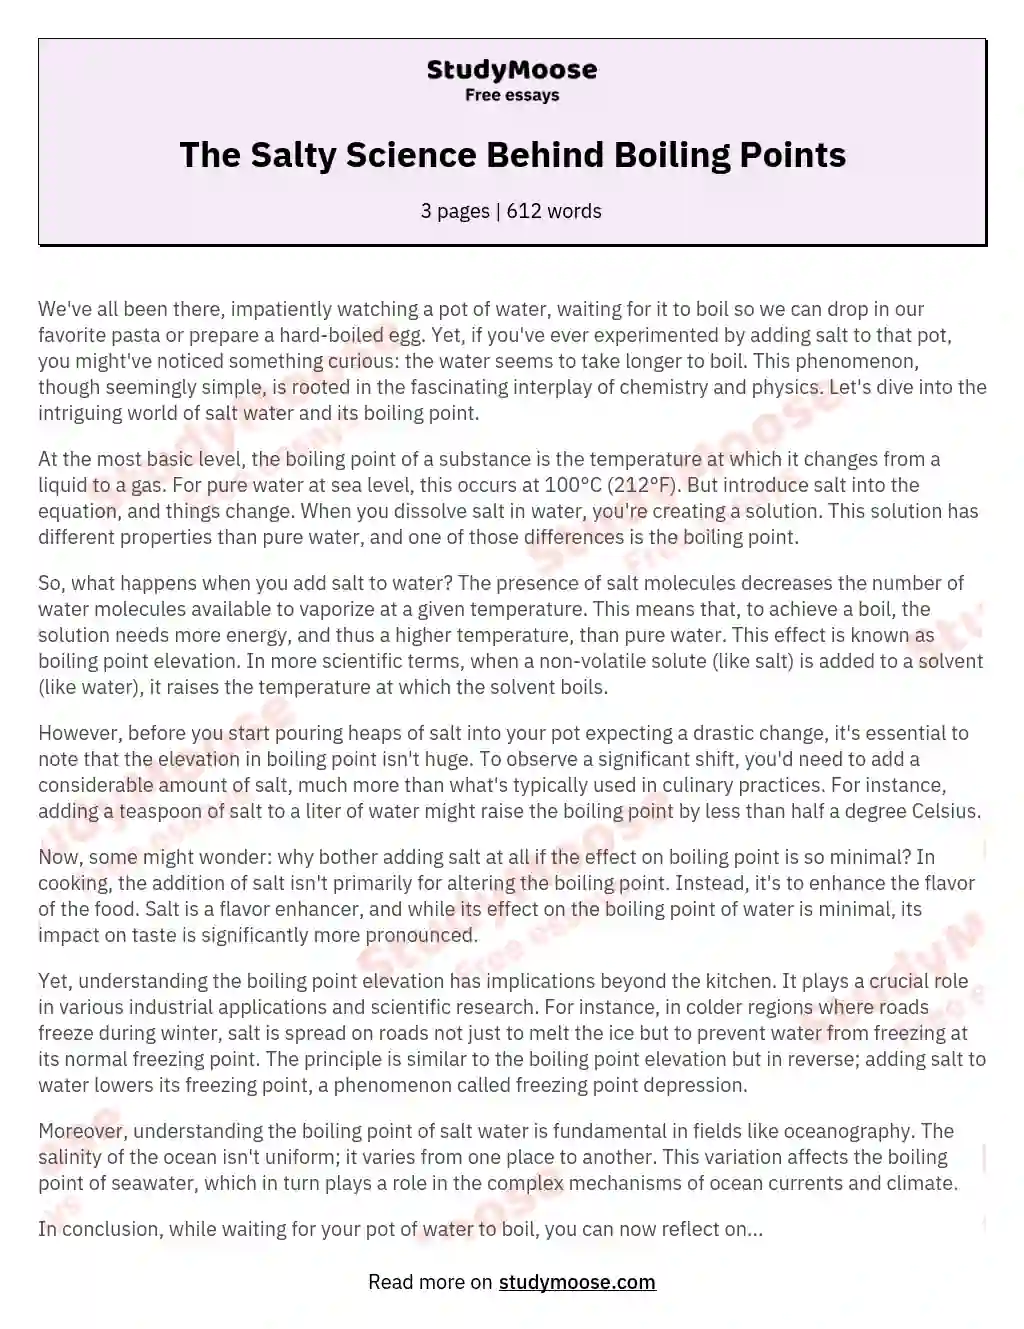 The Salty Science Behind Boiling Points essay